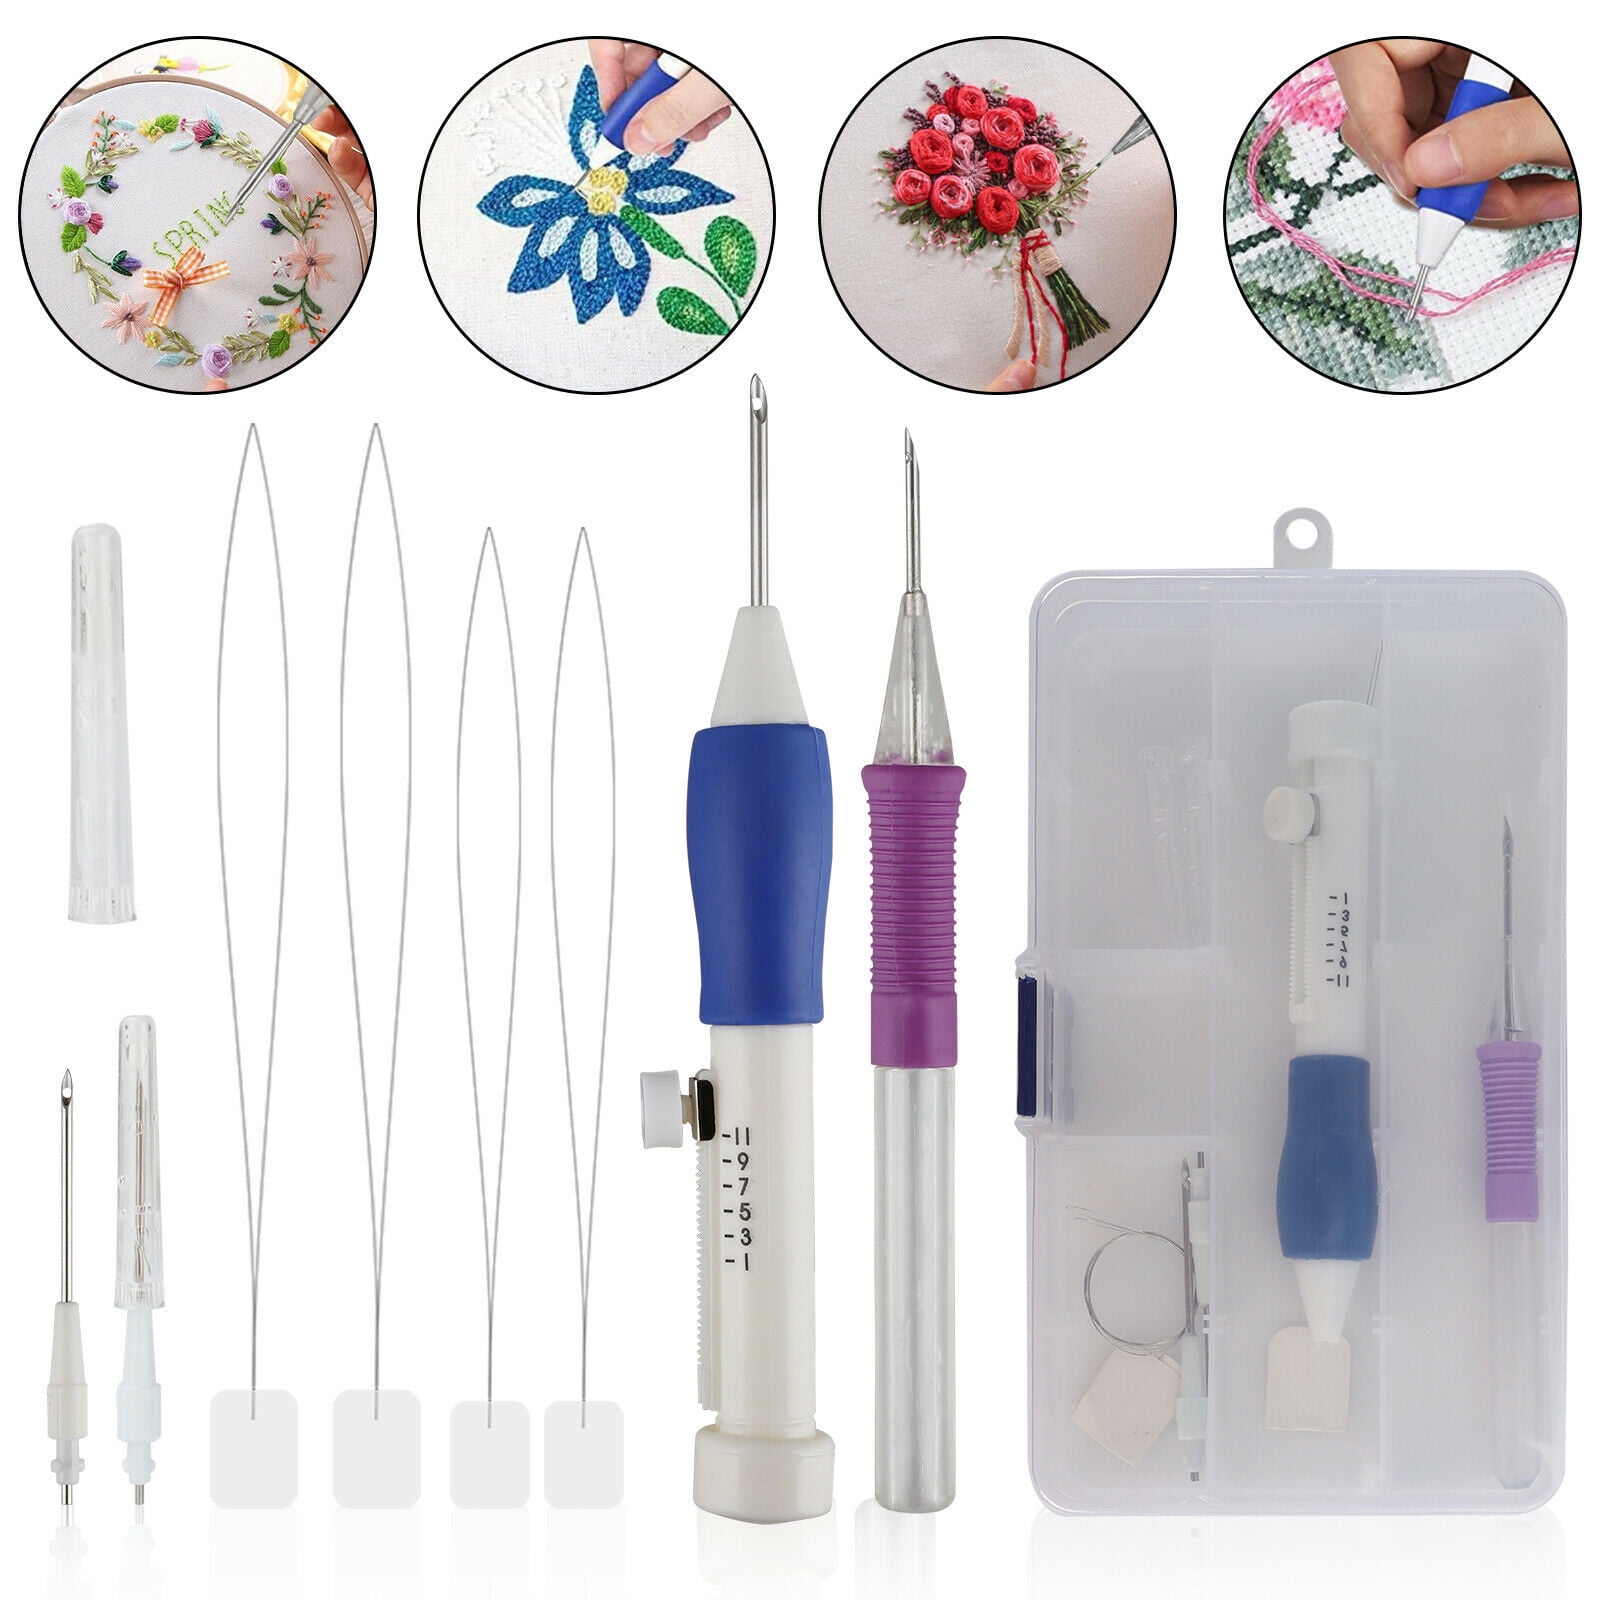 Magic Bricolage Broderie Pen Set knitting sewing Tool Kit punch aiguille couture